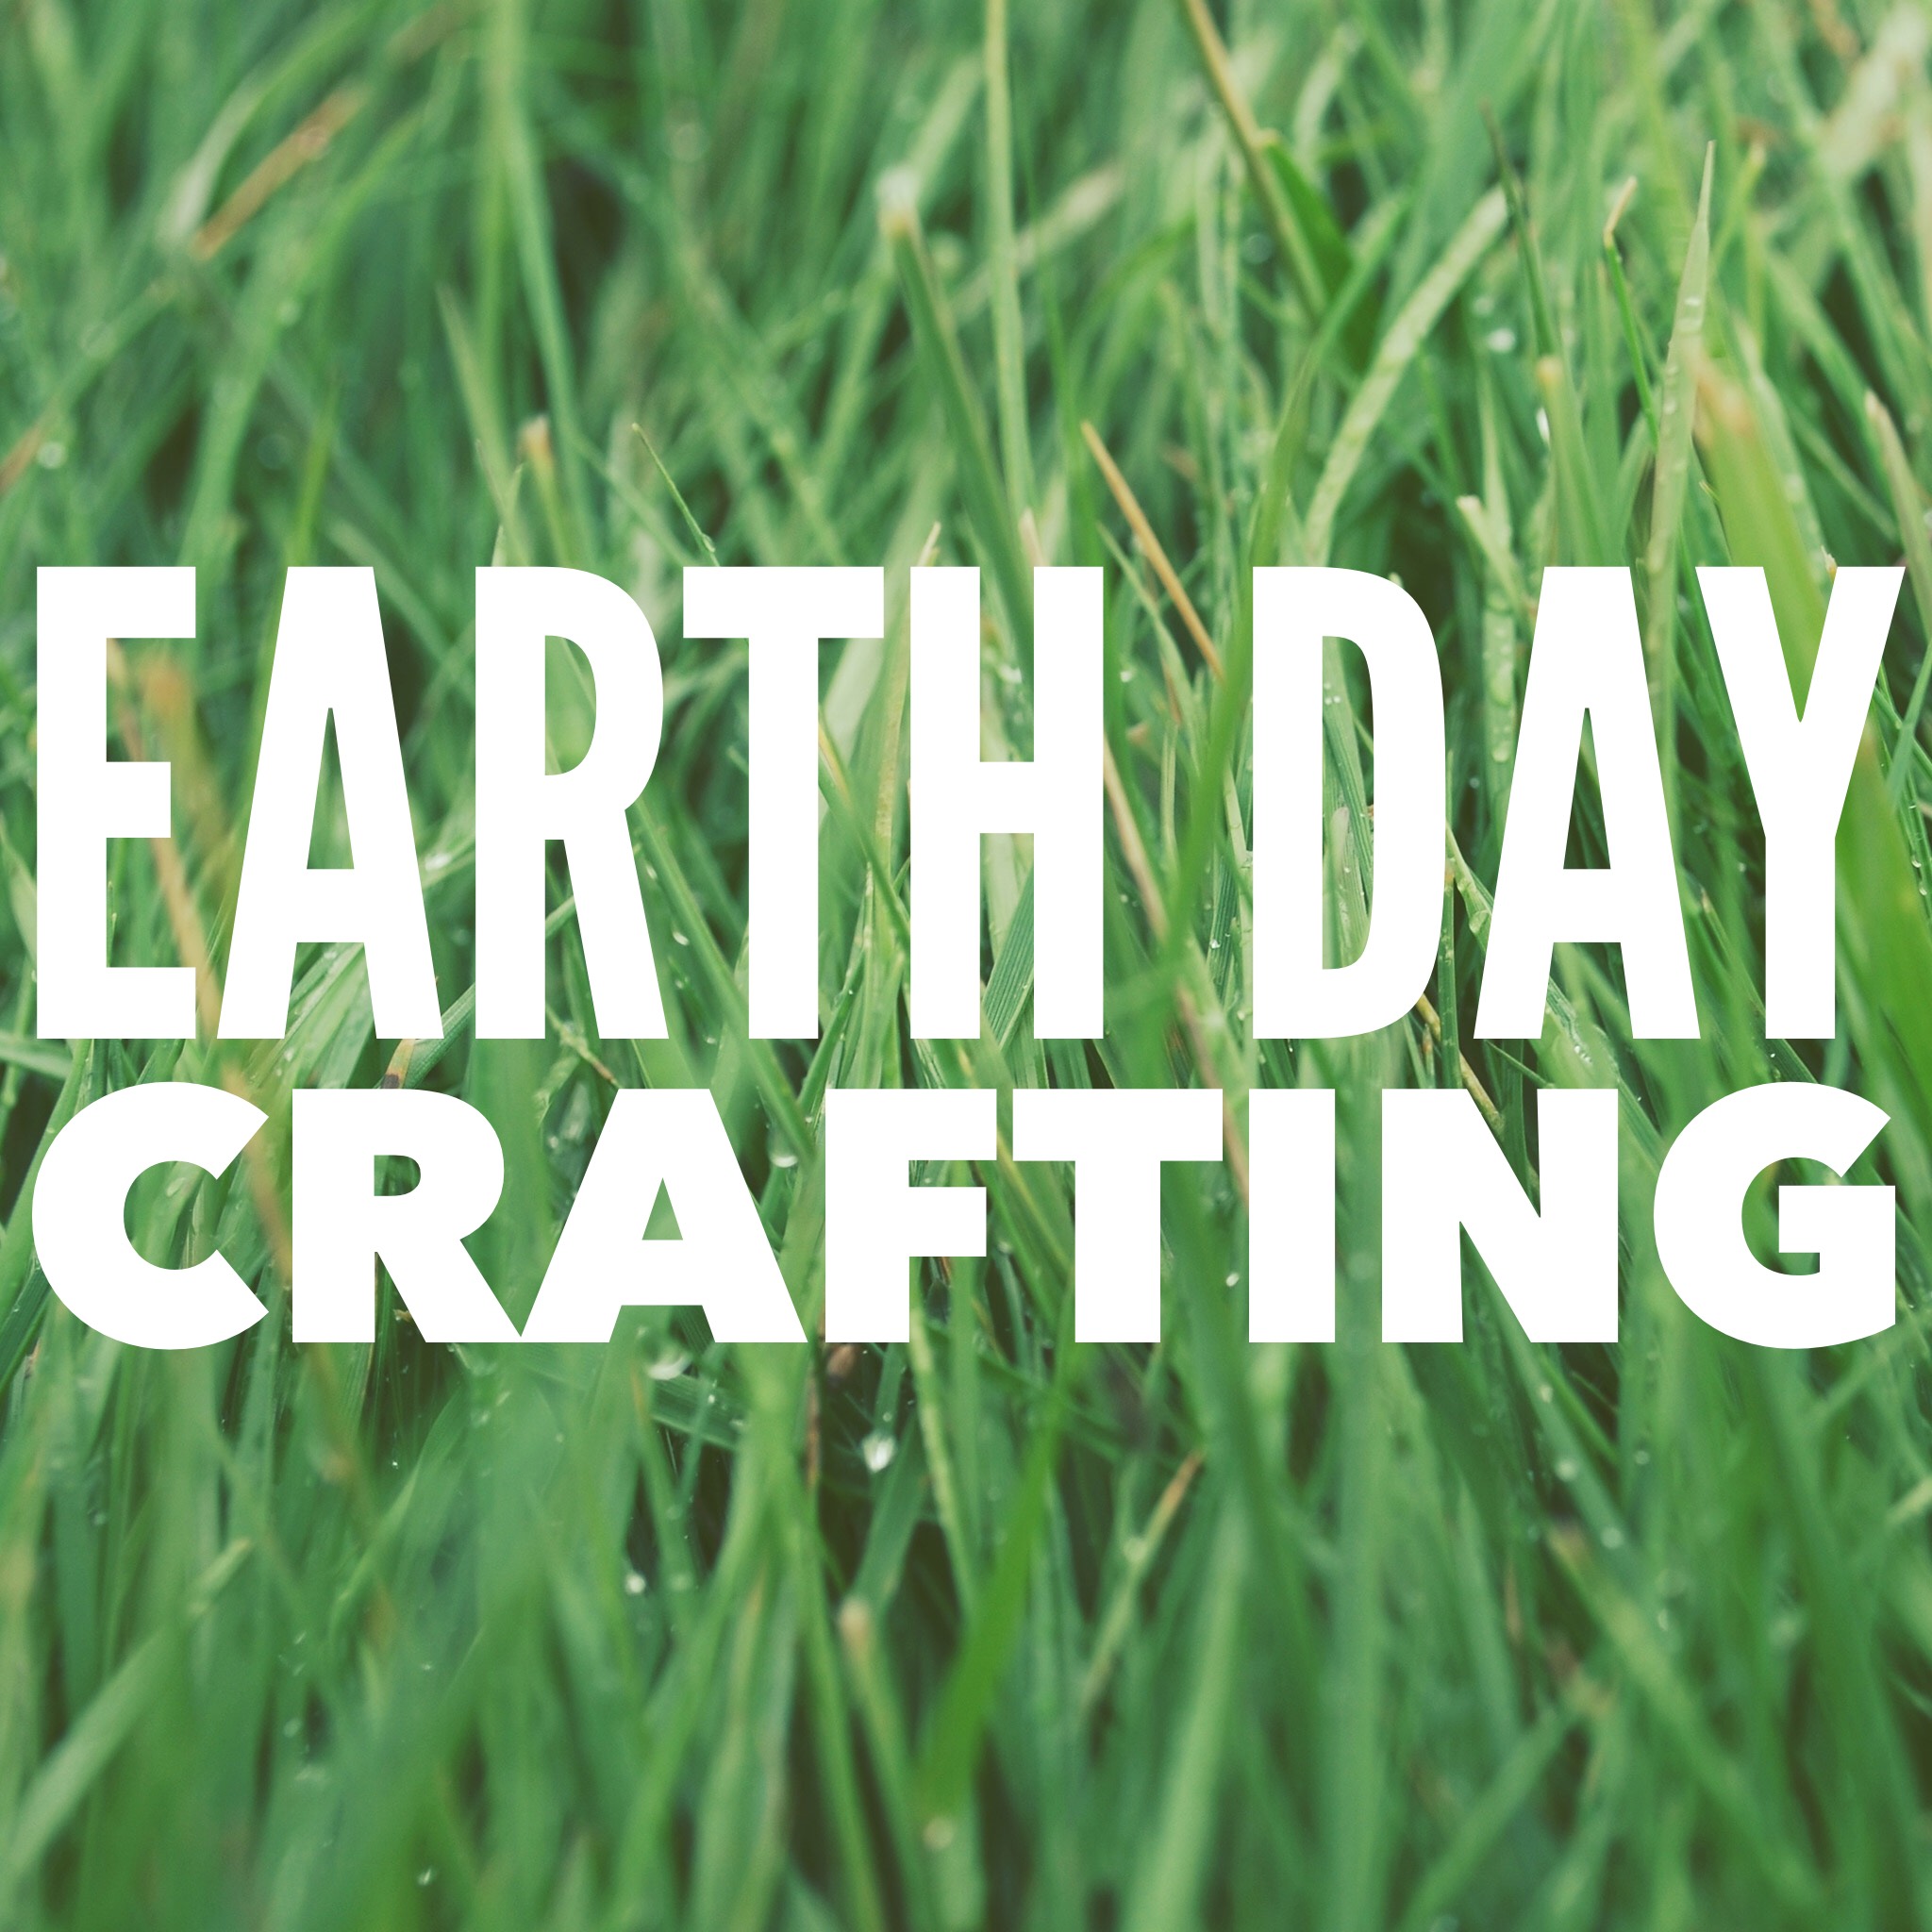 Earth Day Crafting: 12 Patterns for a Healthier Planet